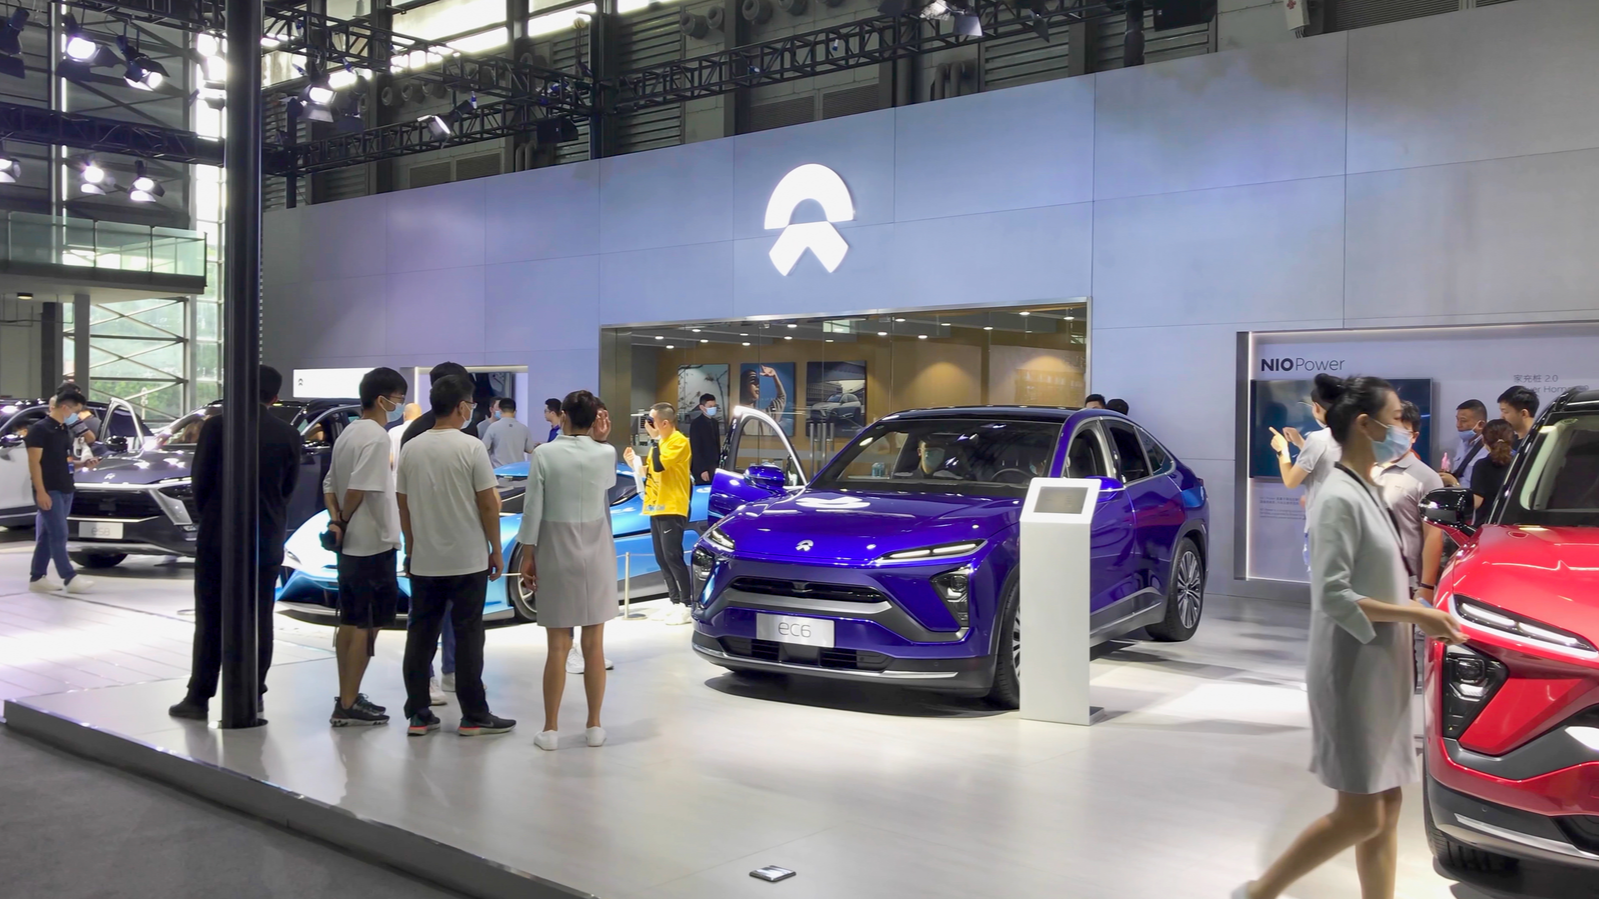 NIO booth showroom in Shanghai Pudong International Auto Show. Car exhibition and vehicle promotion. Auto business and economy staff with mask coronavirus period